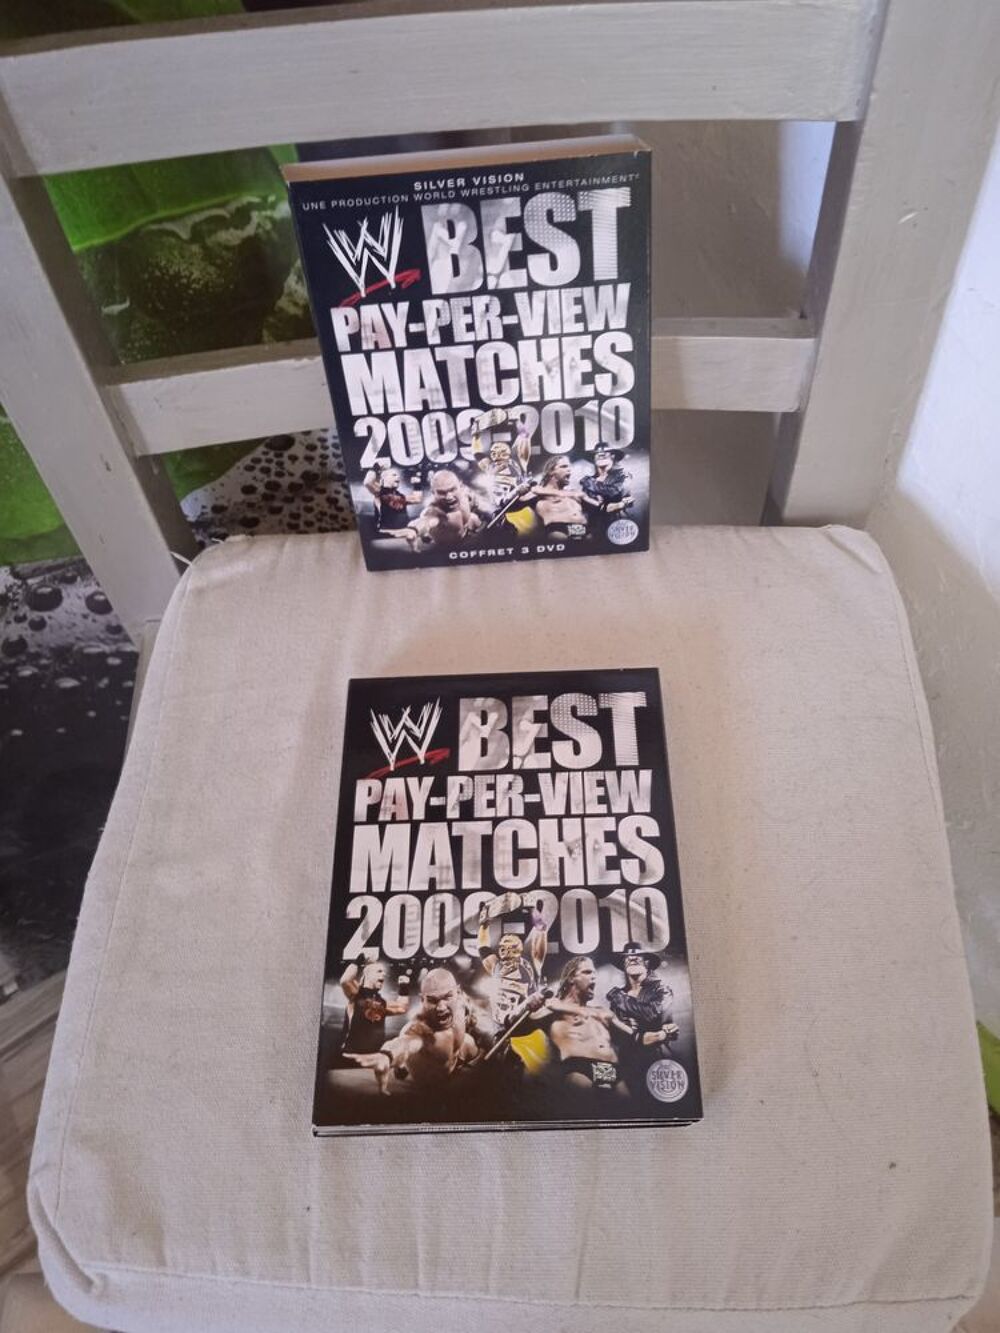 DVD WWE: The Best Pay-Per-View Matches 2009-2010
2010
Exc DVD et blu-ray